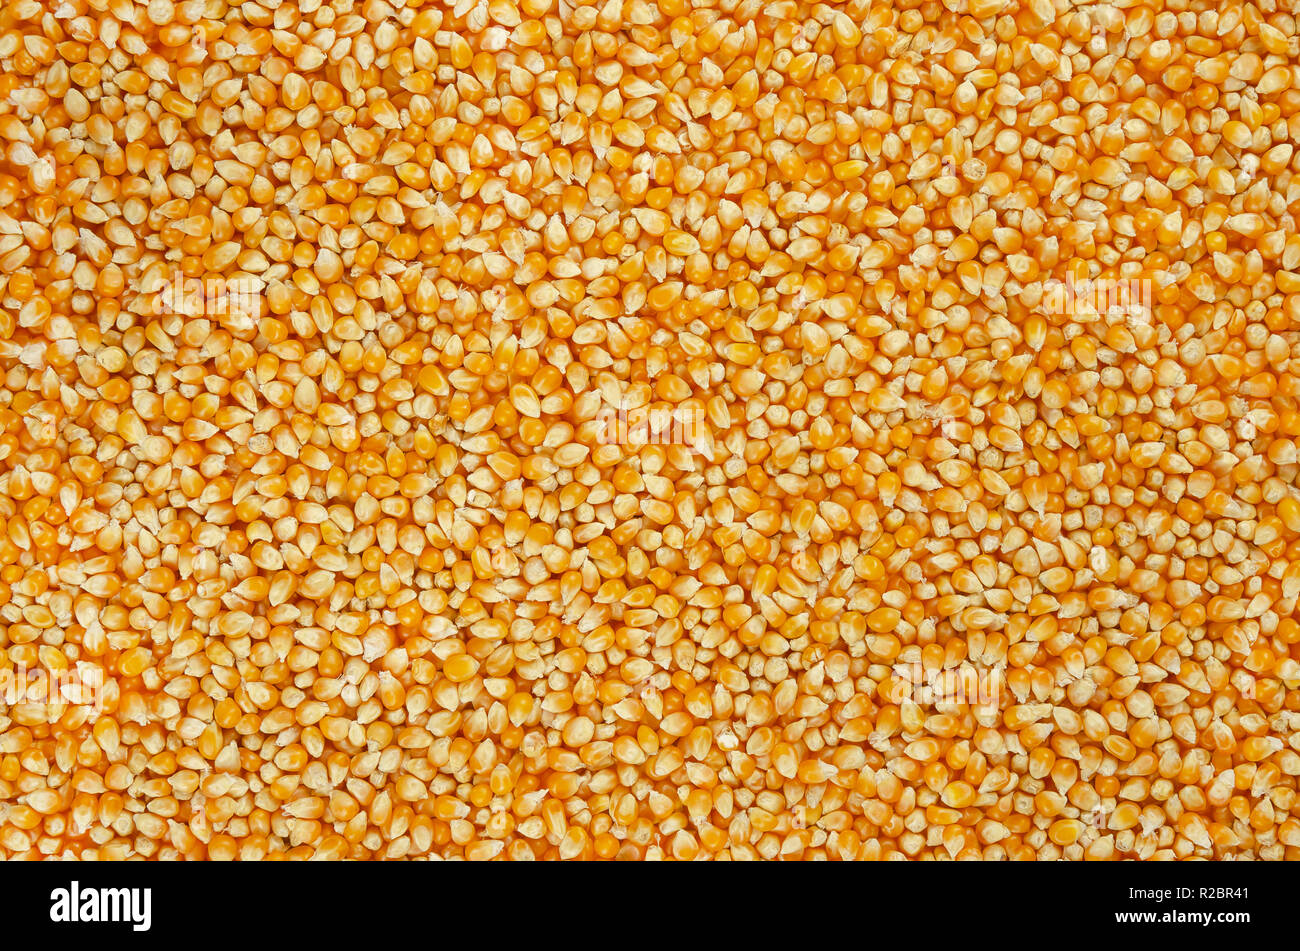 Unpopped popcorn, surface and background. A type of corn that expands from the kernel and puffs up when heated. Yellow seeds. Stock Photo